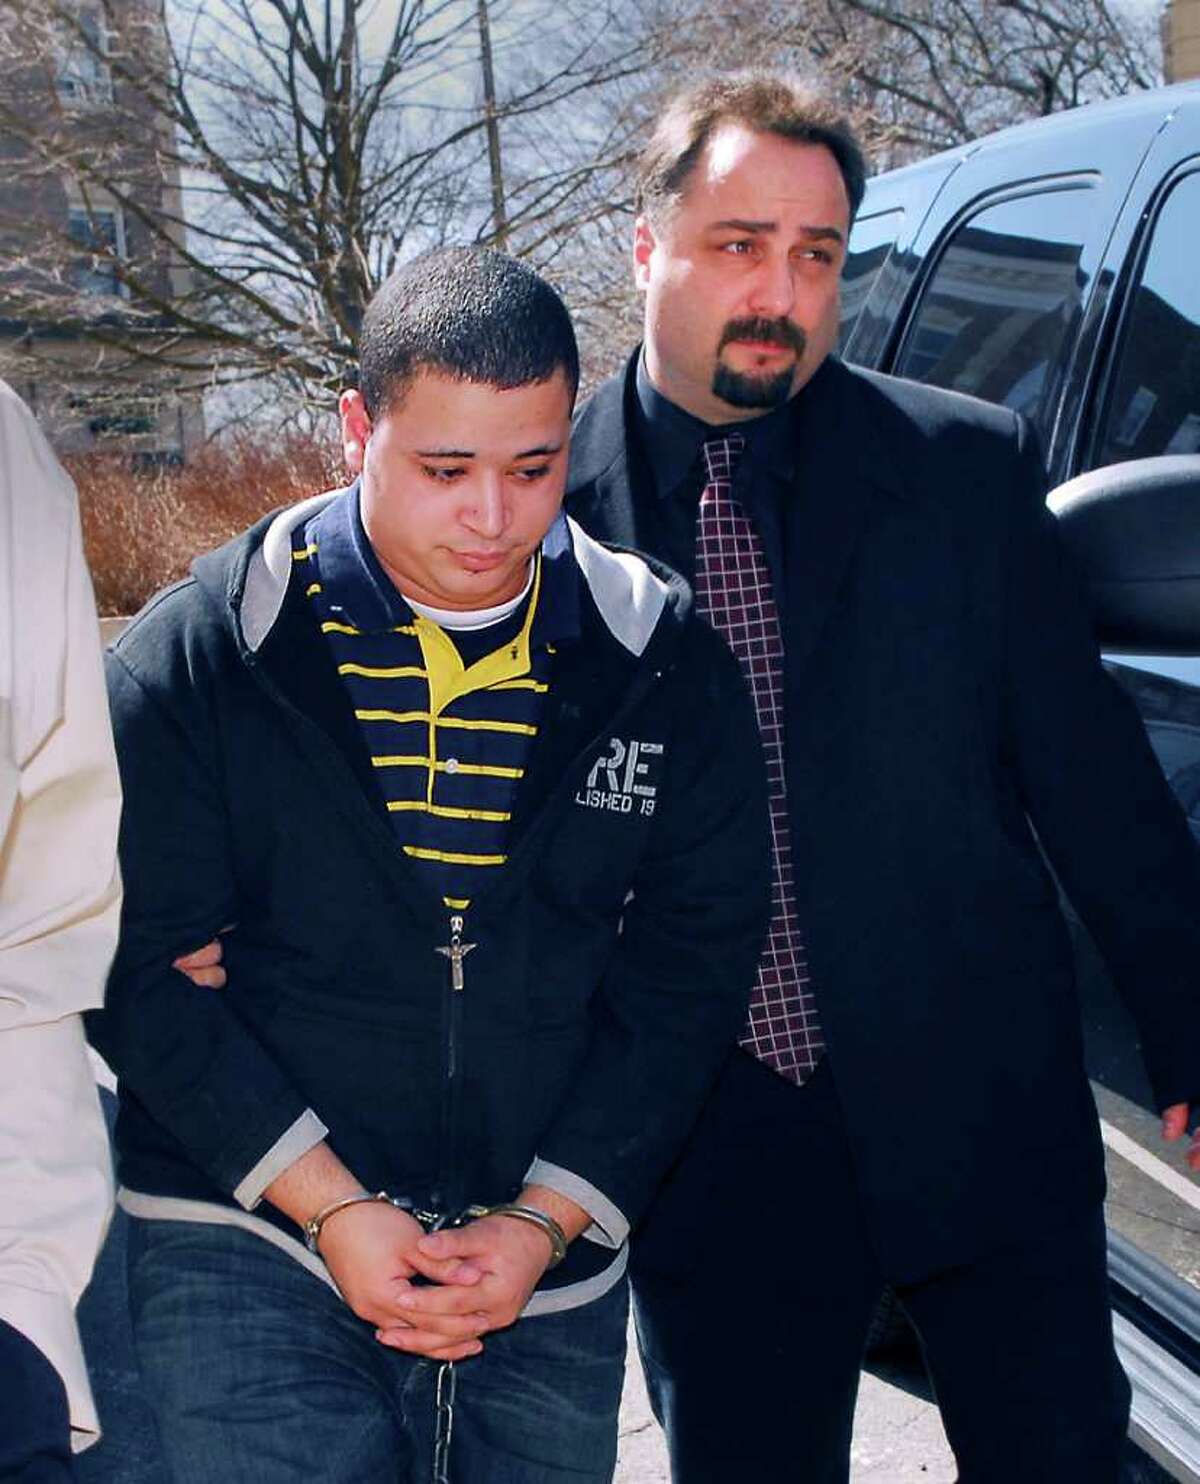 In this March 2008 file photo, Leonard Trujillo, of Worcester, Mass, left, is led into Greenwich police headquarters by Detective Pasquale Iorfino. Trujillo and Iorfino were both on the stand Thursday in state Superior Court in Stamford in the murder trial of Trujillo's cousin Carlos, who is accused in Kissel's death.